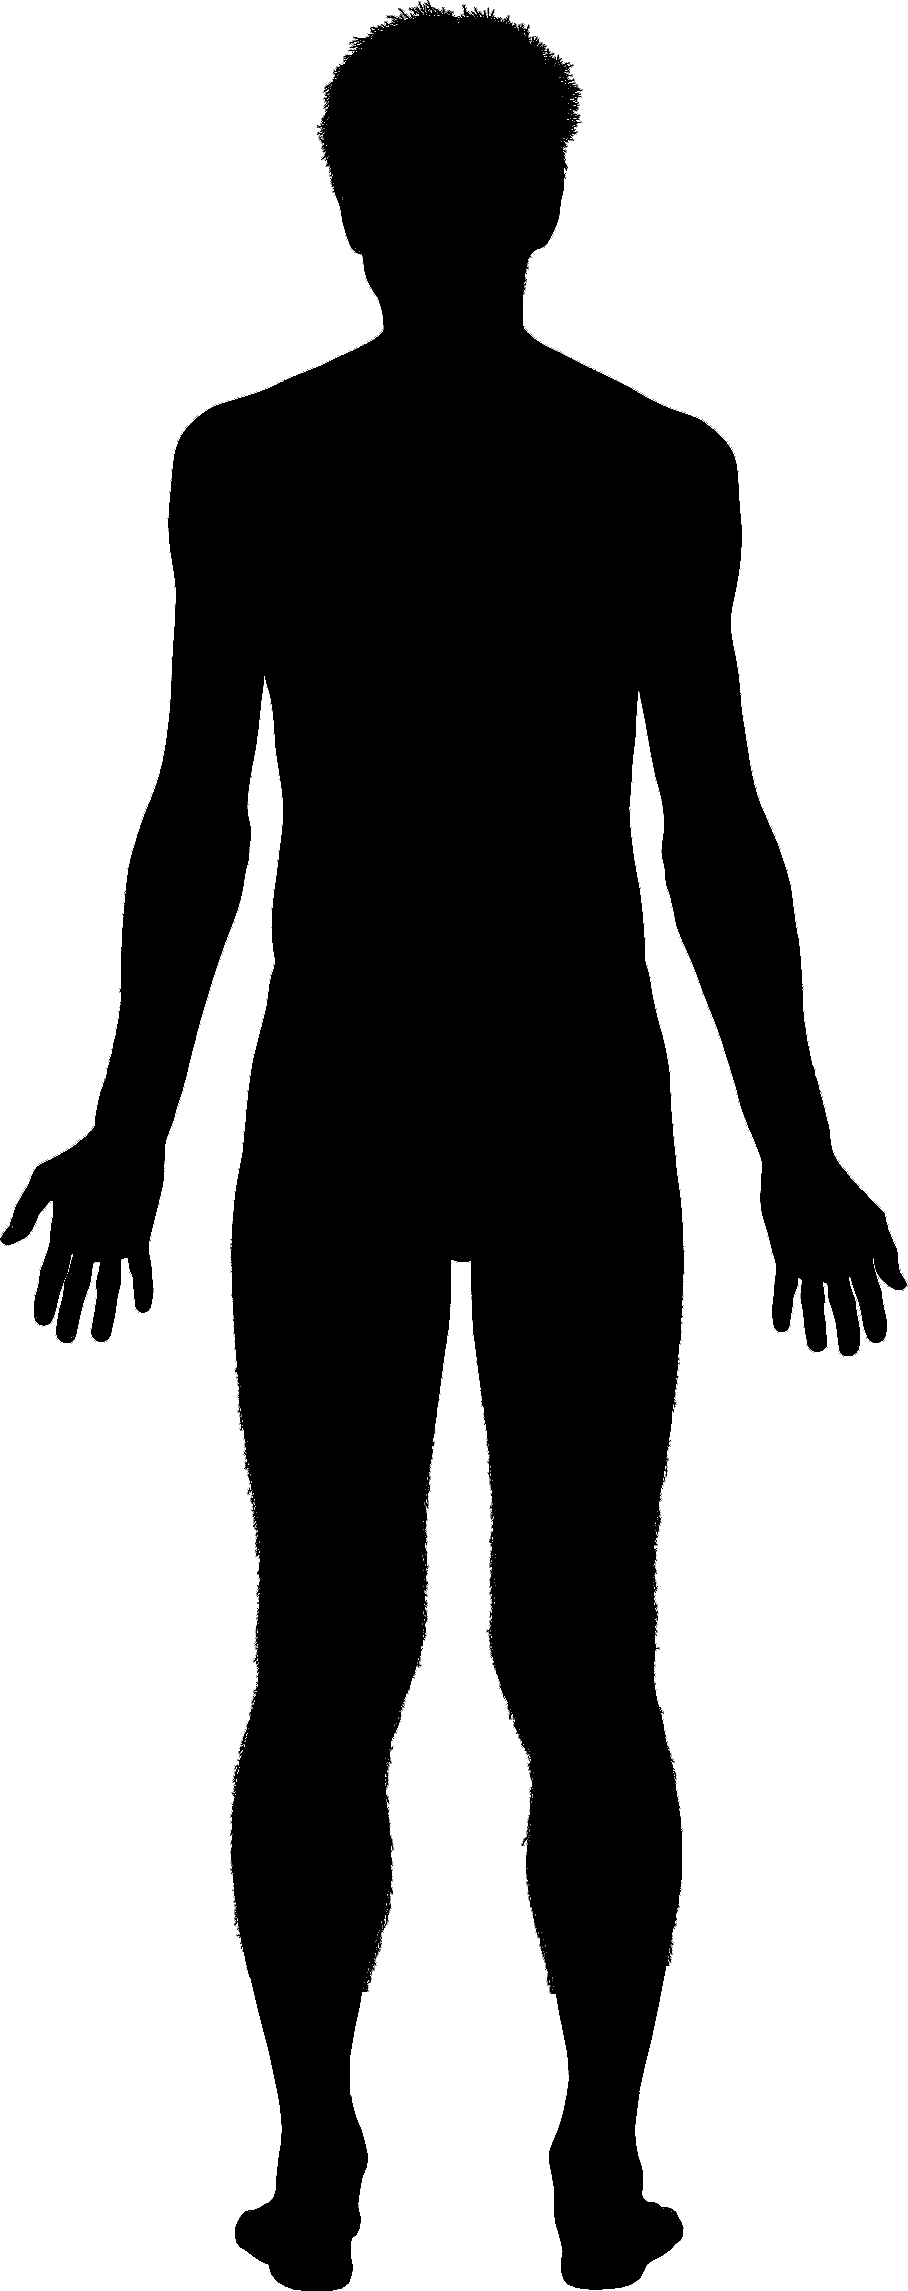 clipart human body outline - photo #42